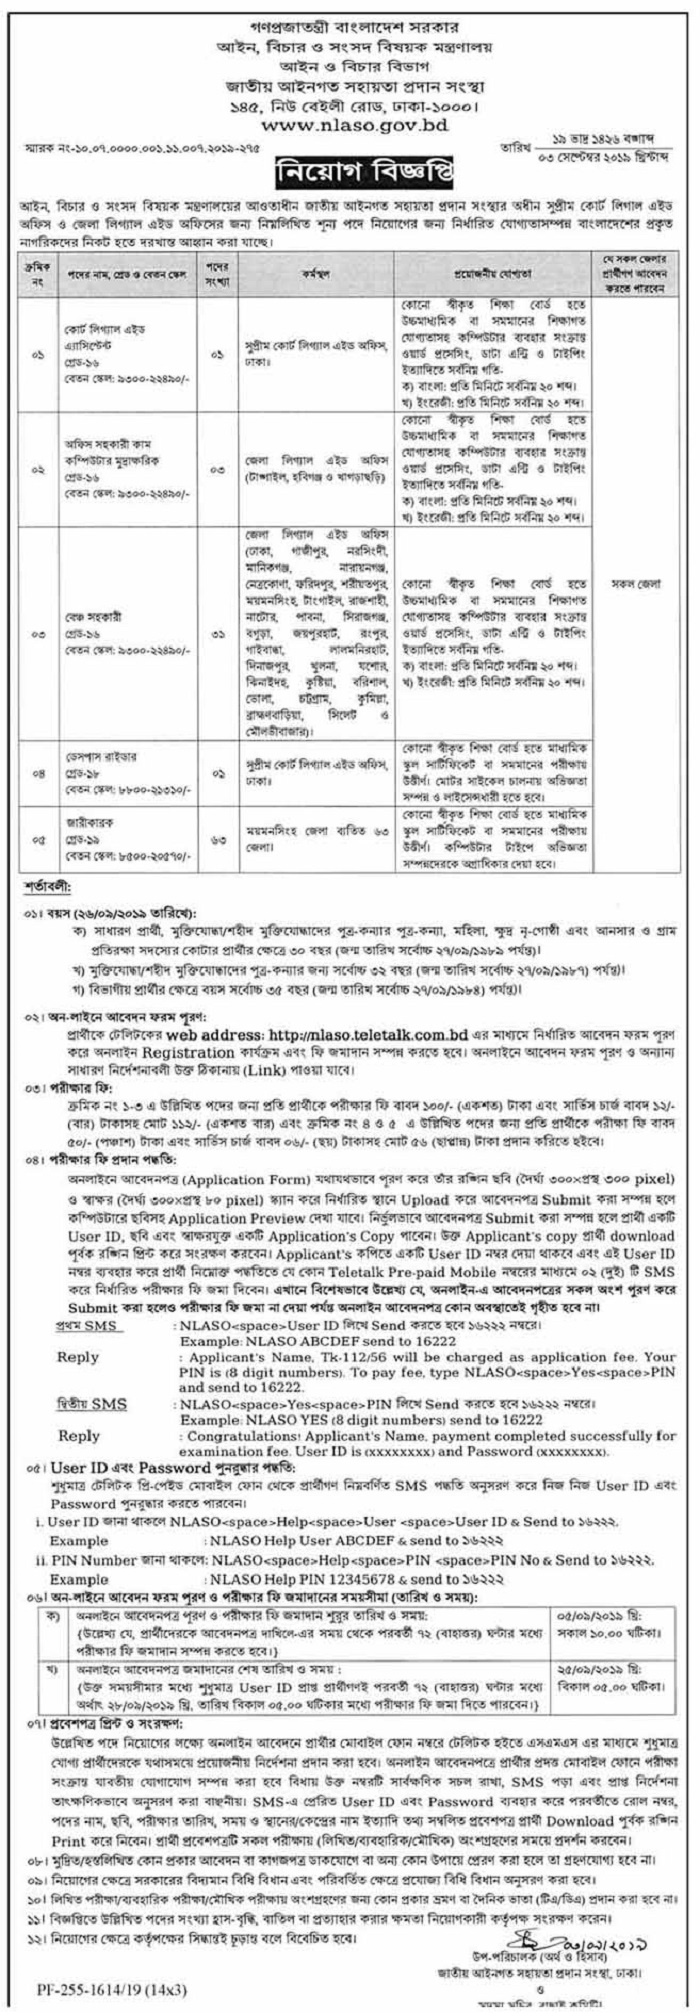 Ministry of Law, Justice and Parliamentary Affairs Job Circular 2019